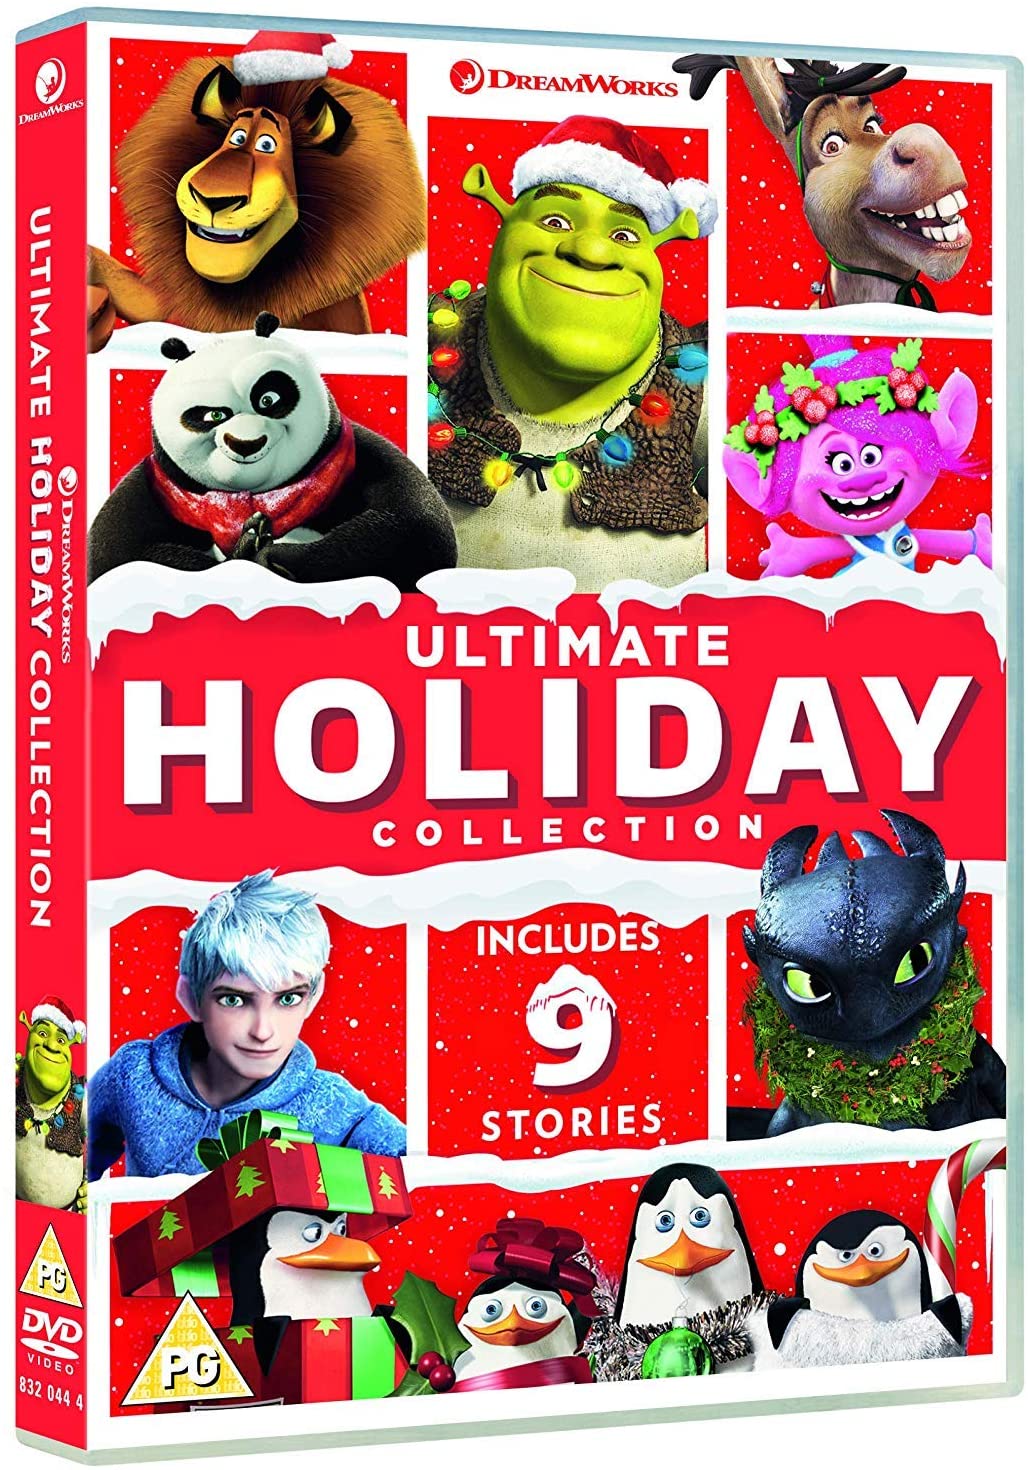 Dreamworks: Ultimate Holiday Collection (Dreamworks) (DVD)